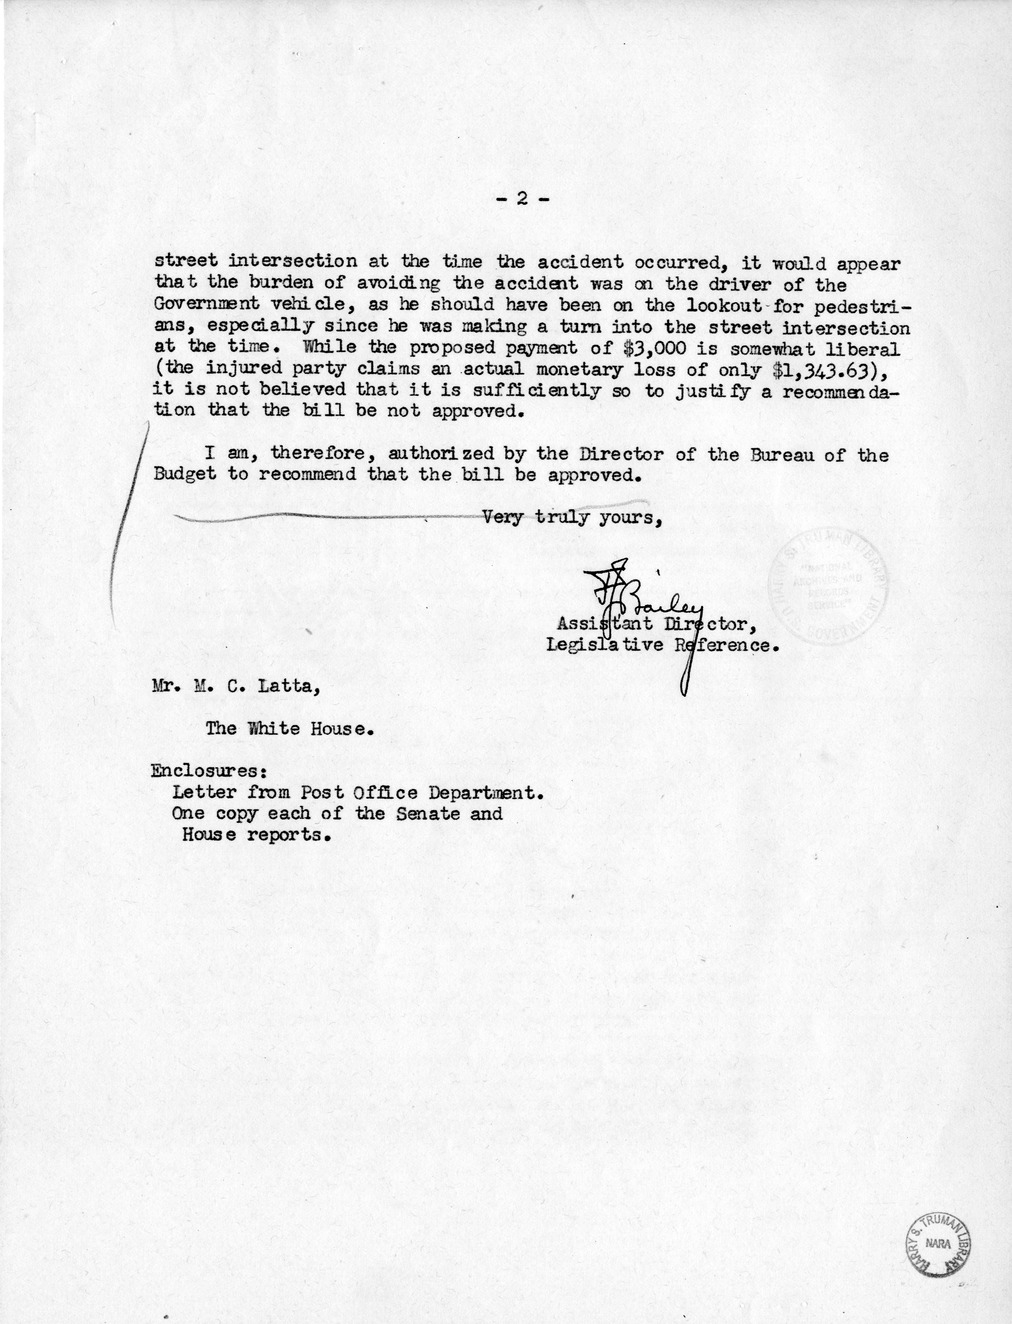 Memorandum from Frederick J. Bailey to M. C. Latta, H.R. 2641, For the Relief of Frank Gien, with Attachments